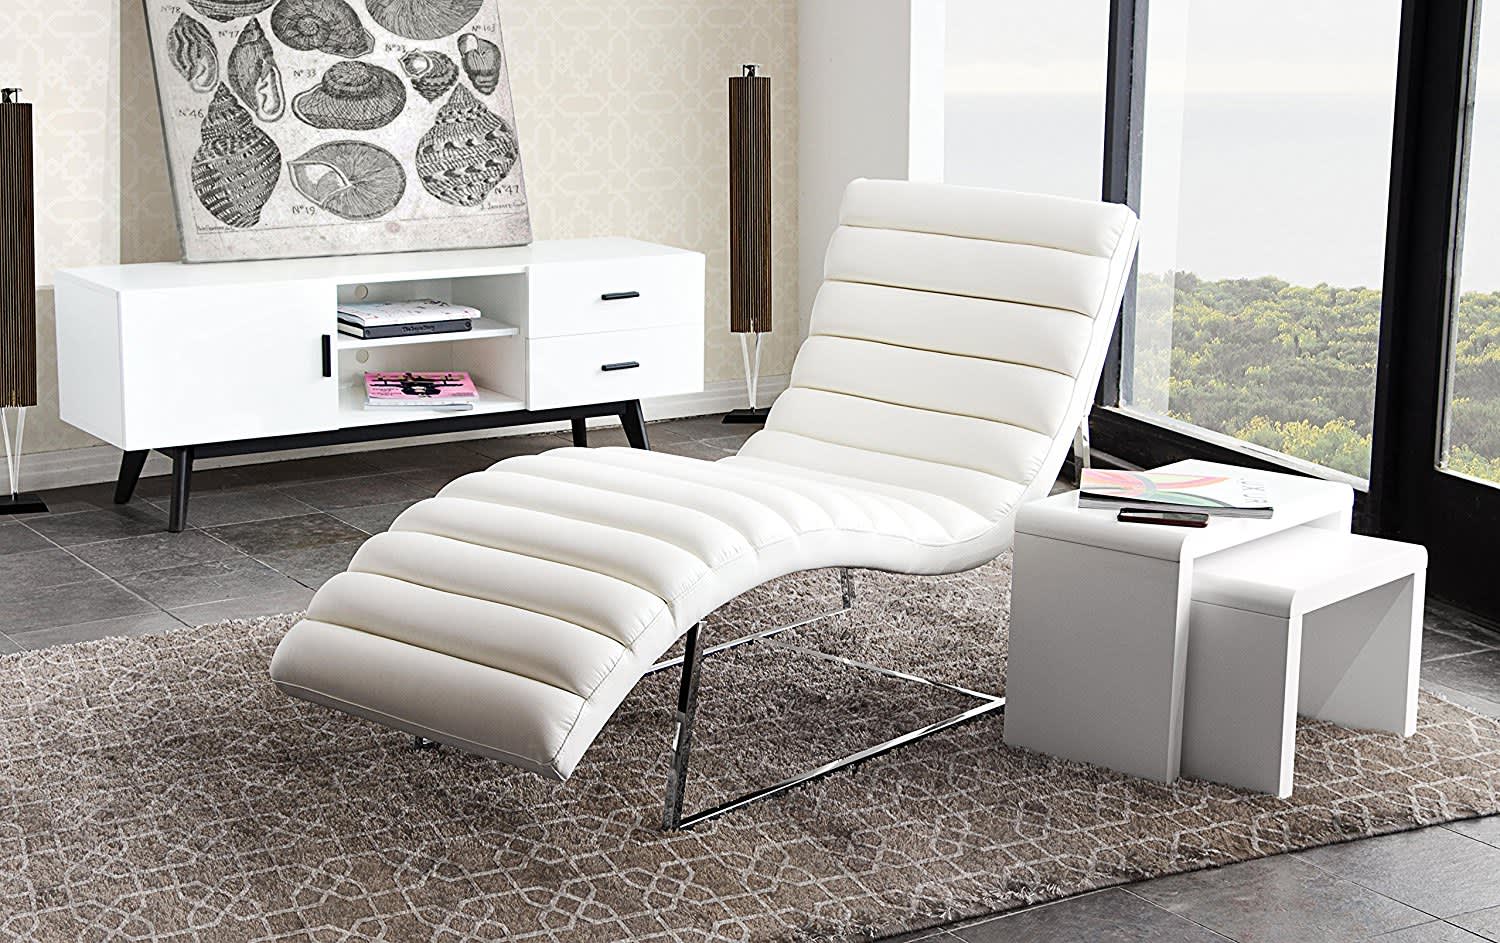 12 of the Best Looking Modern Chaise Lounges | Apartment Therapy